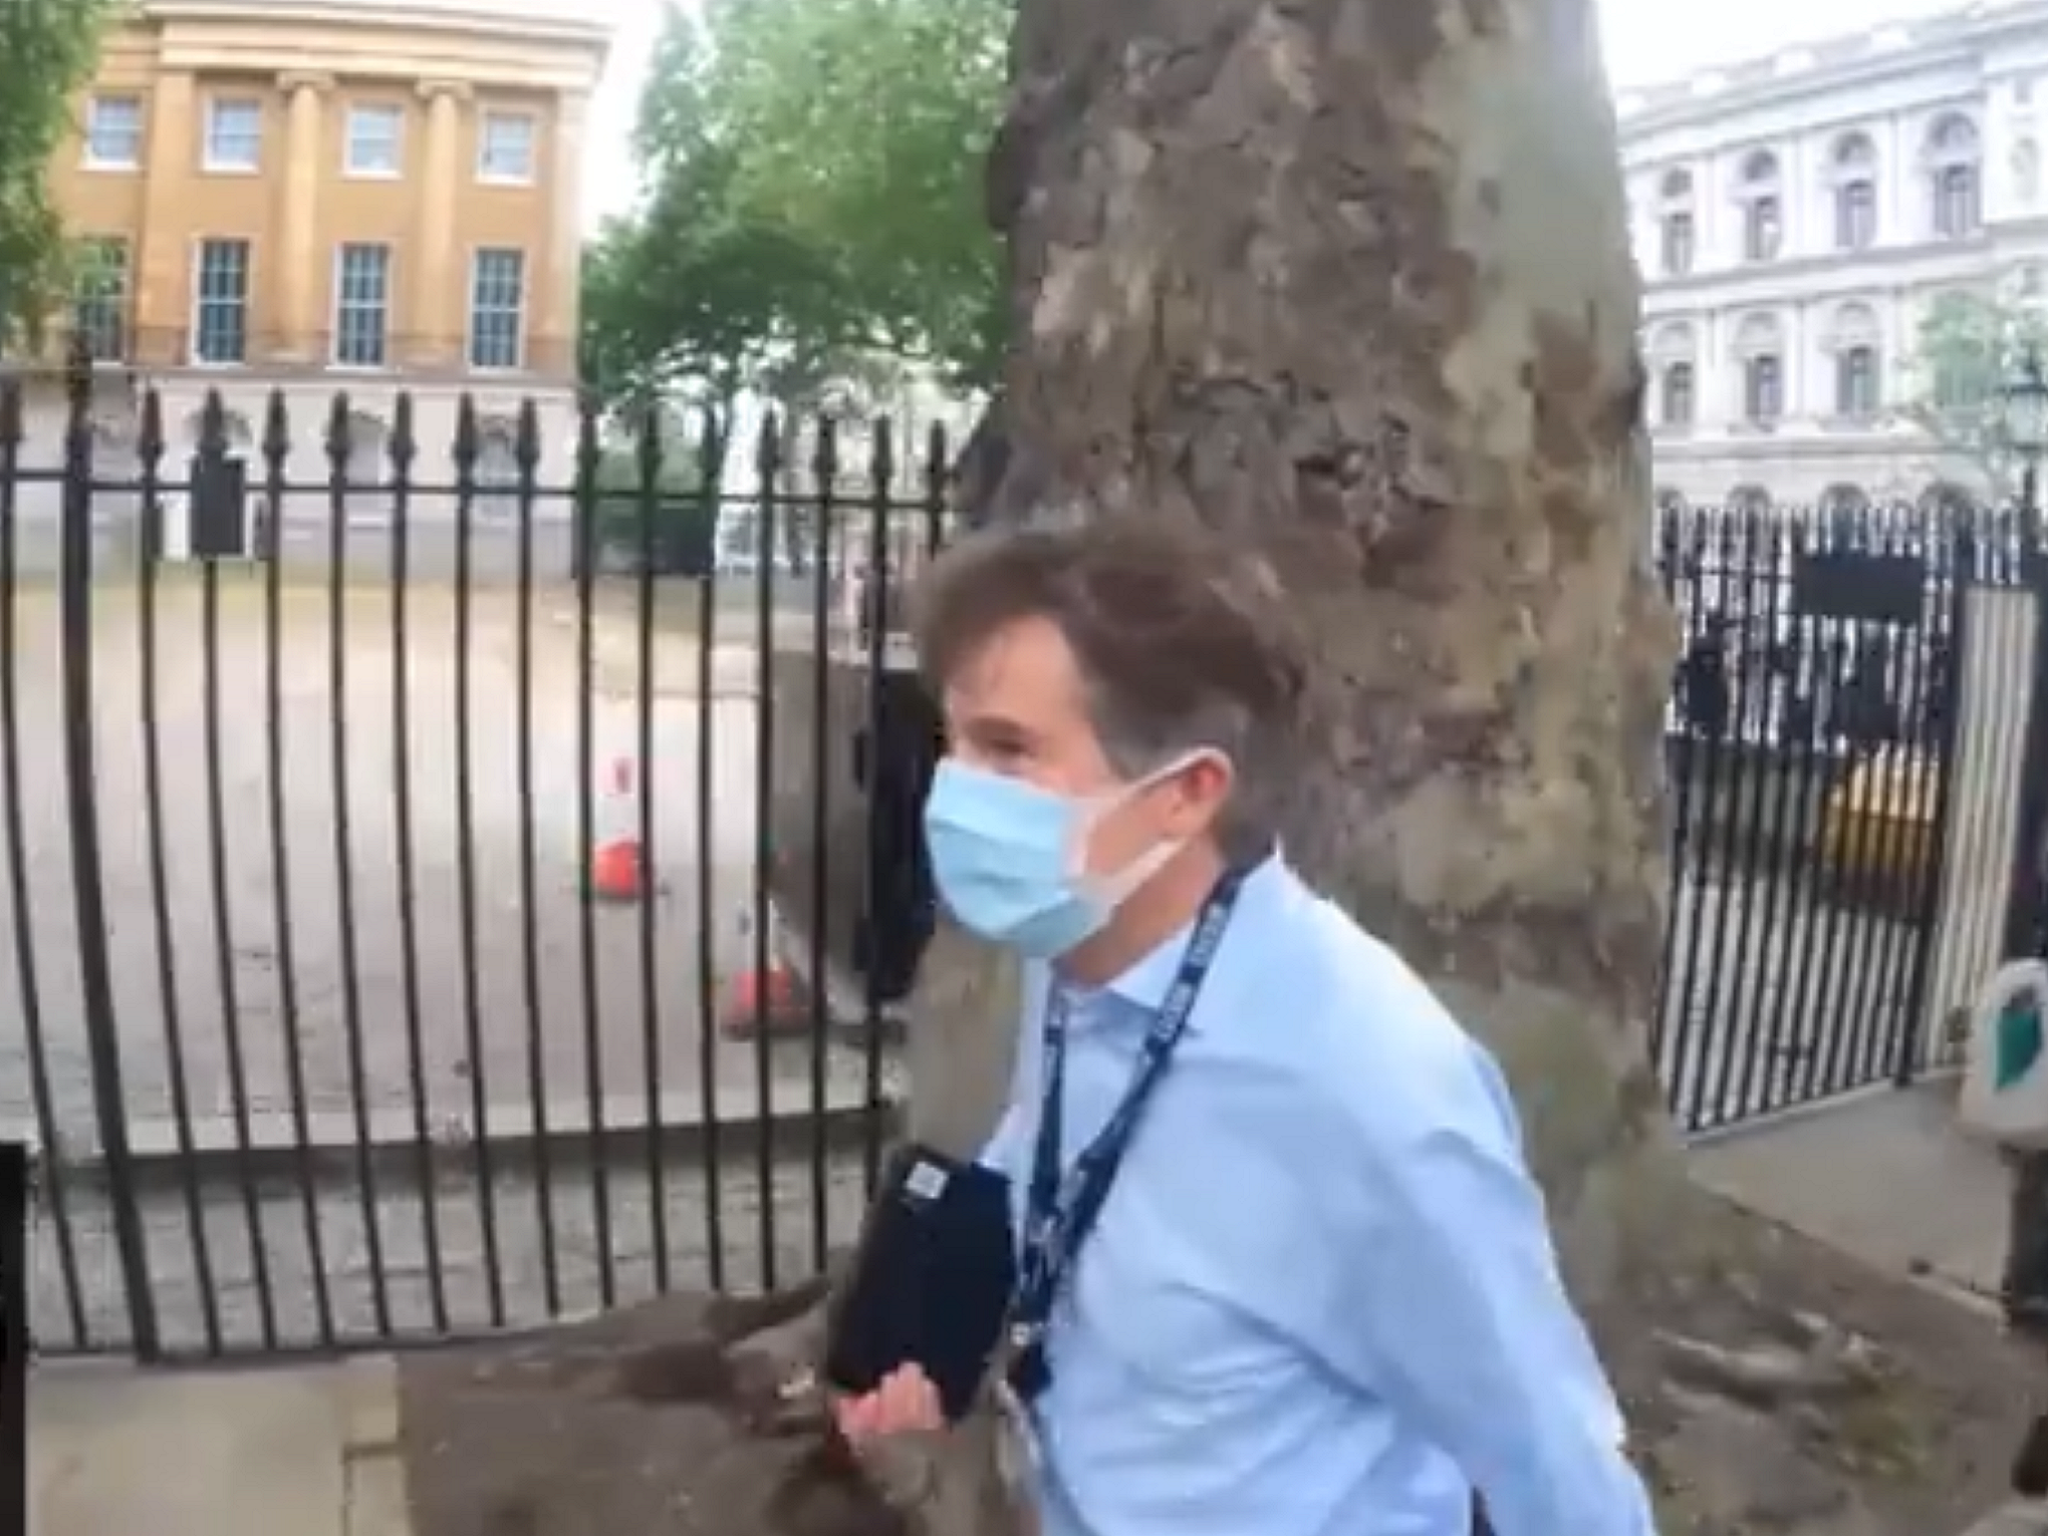 A second arrest has been made after BBC journalist Nick Watt was chased by anti-lockdown protesters near Downing Street